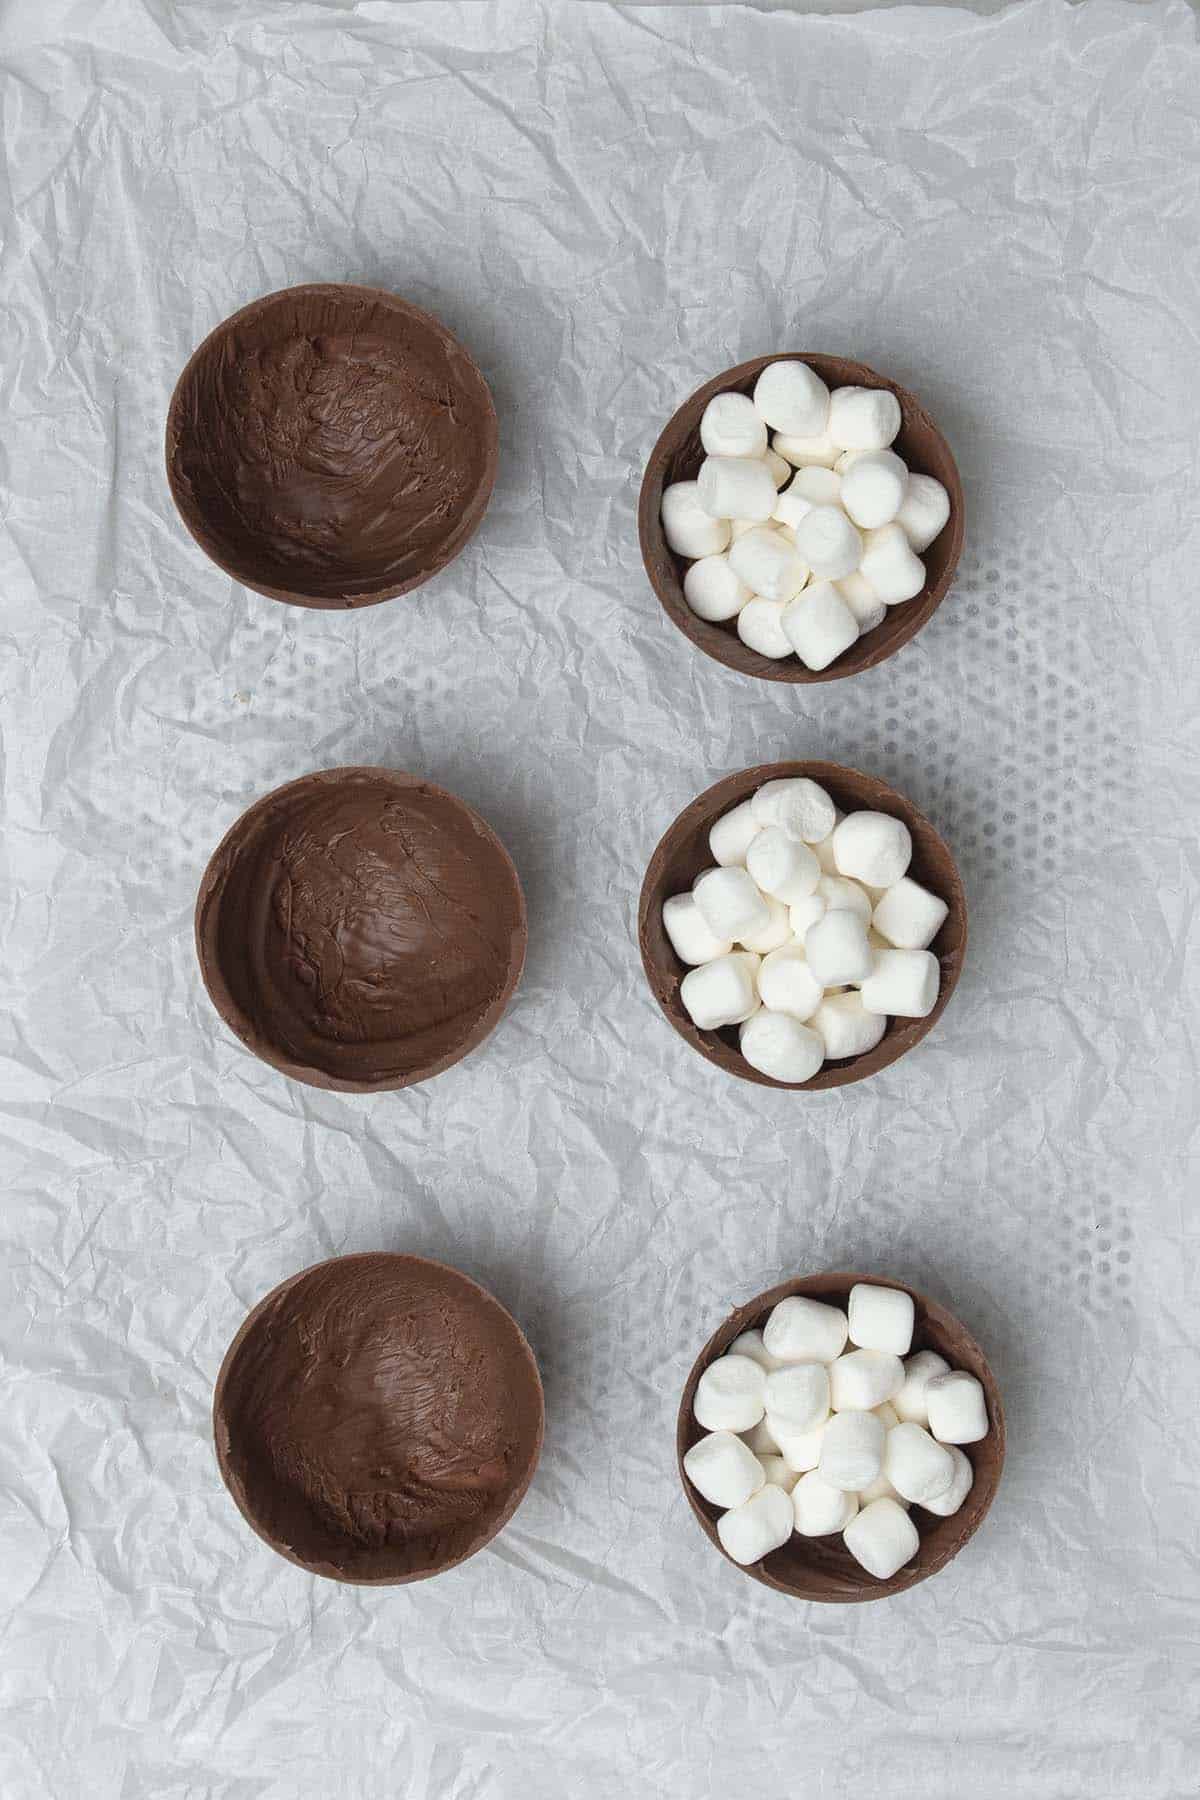 Fill chocolate shell with marshmallow and spices